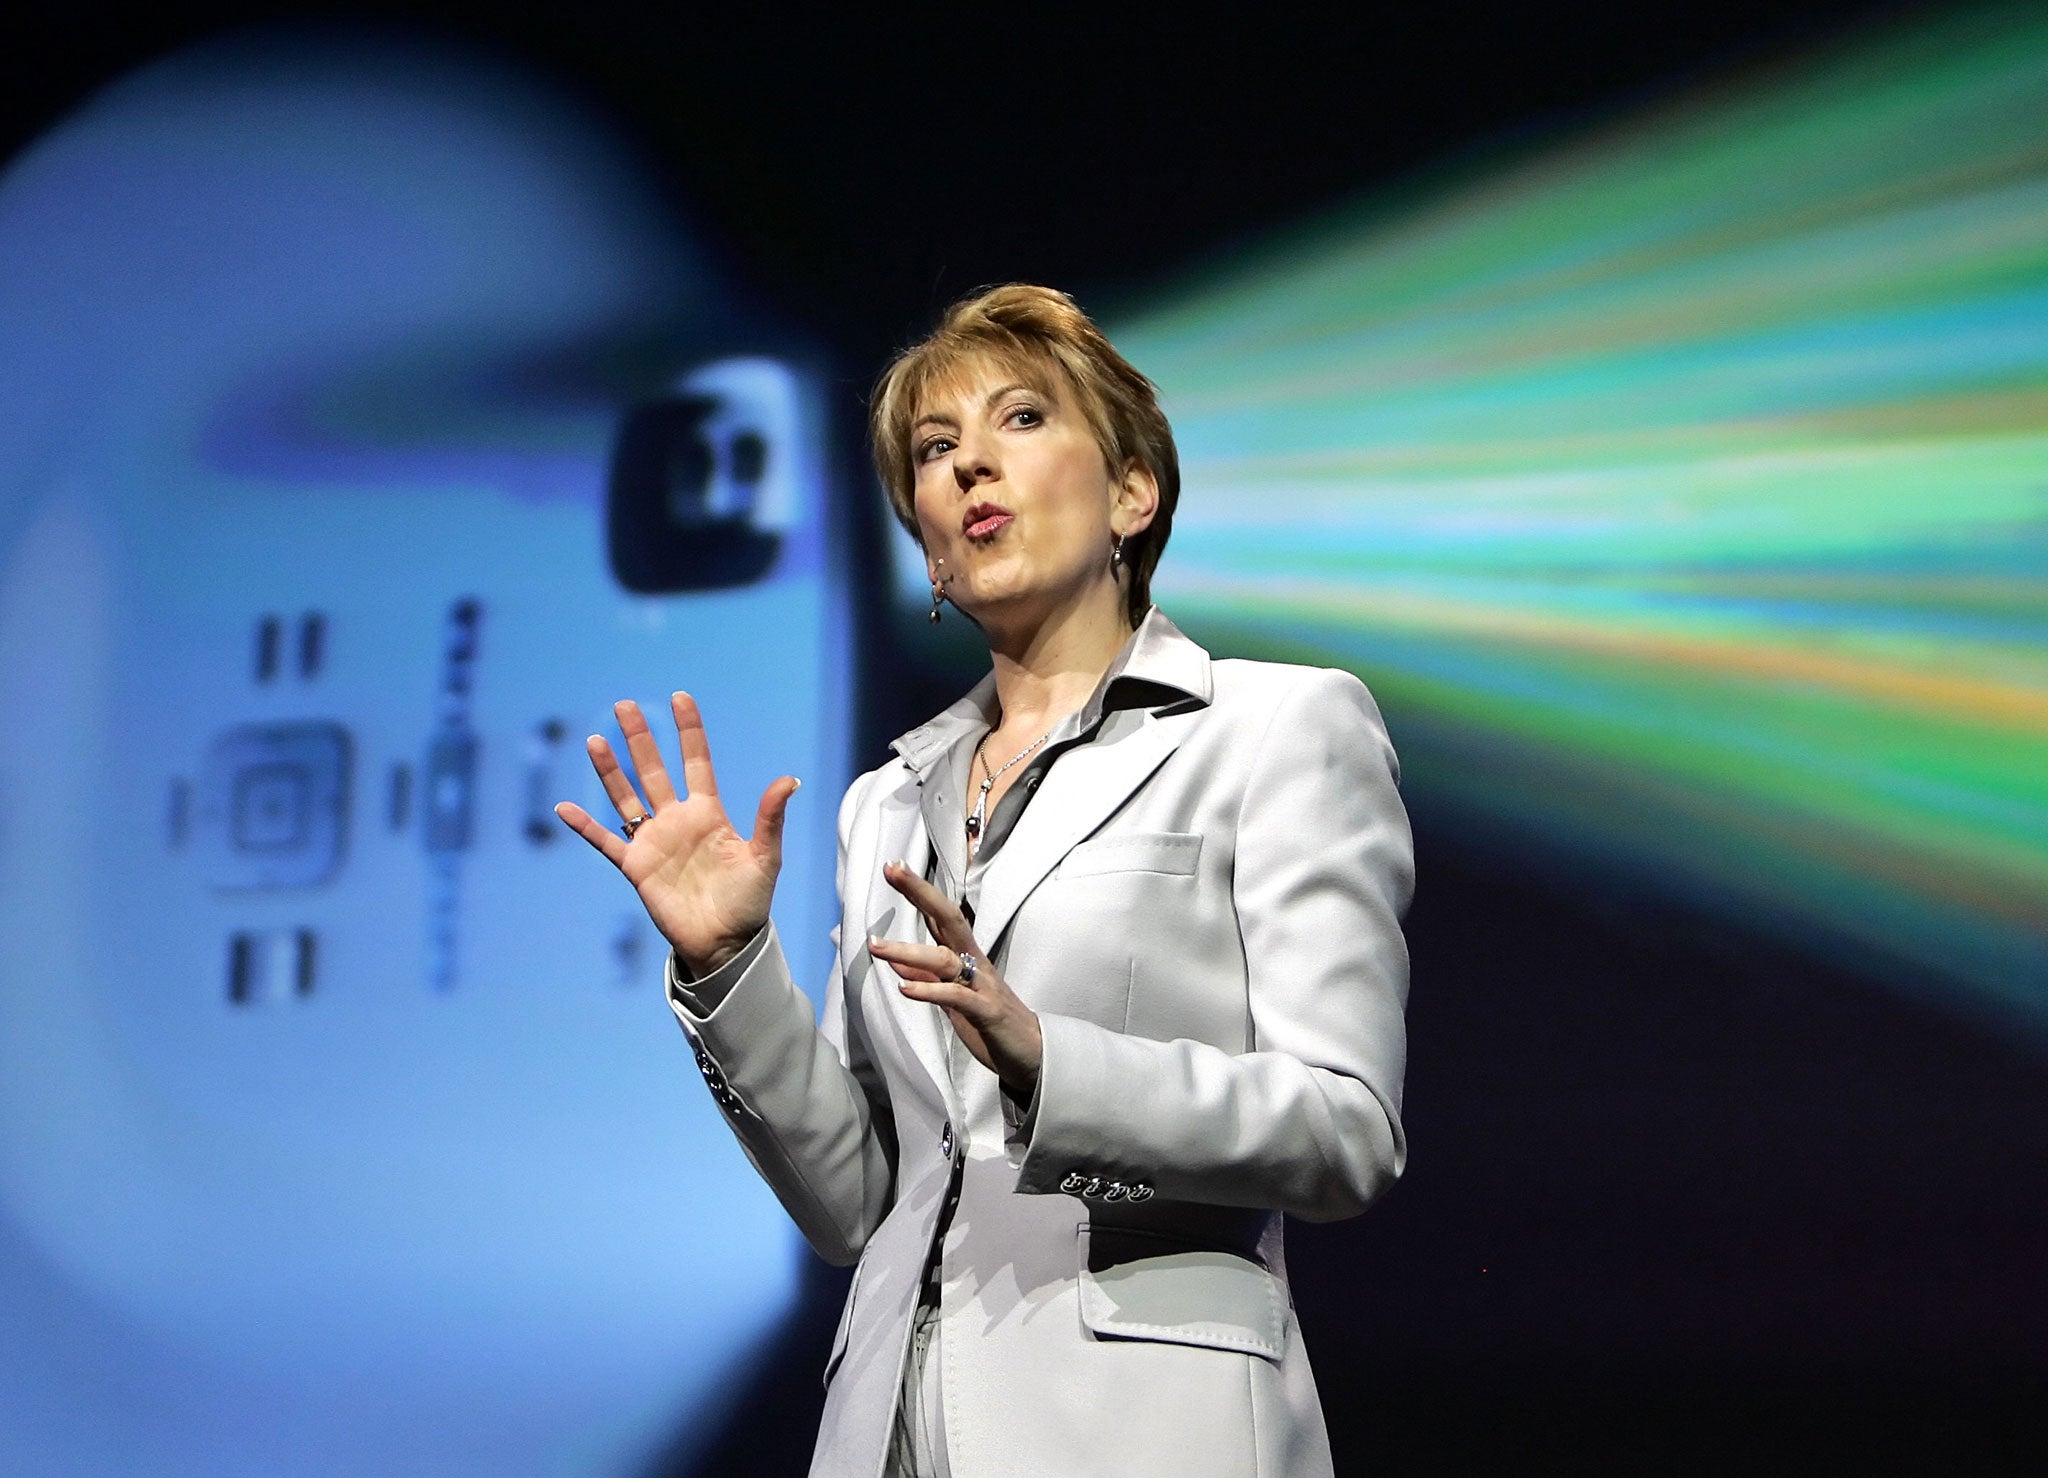 HP lost its way in the late 1990s and 2000s under bosses like Carly Fiorina, who later ran against Donald Trump for the US Republican Party nomination